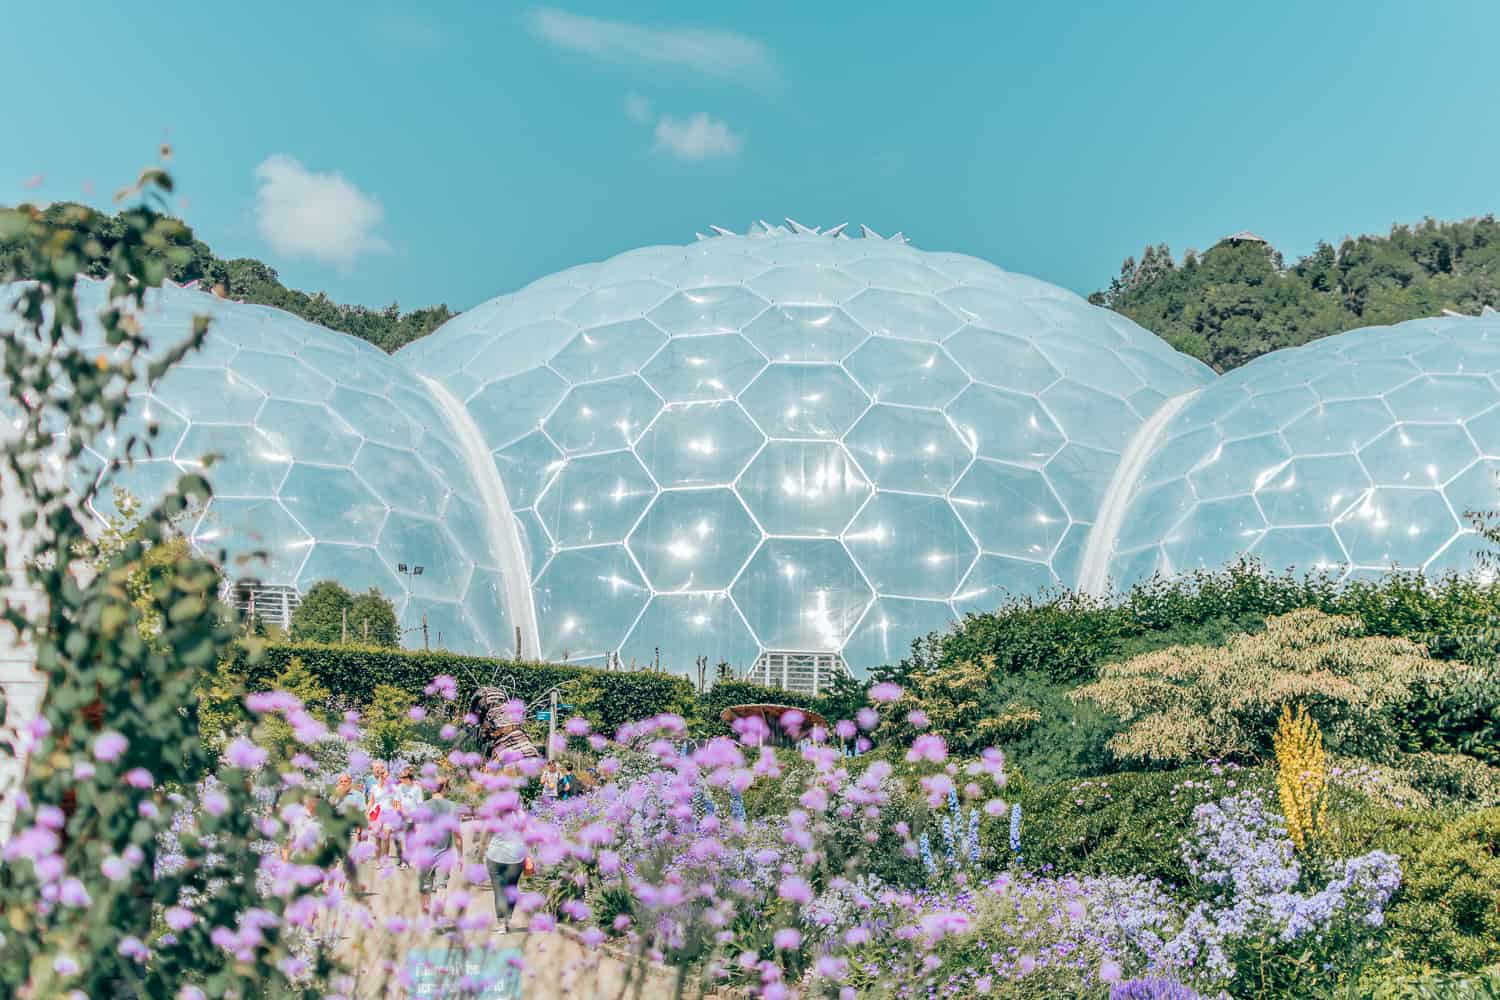 The Eden Project Experience